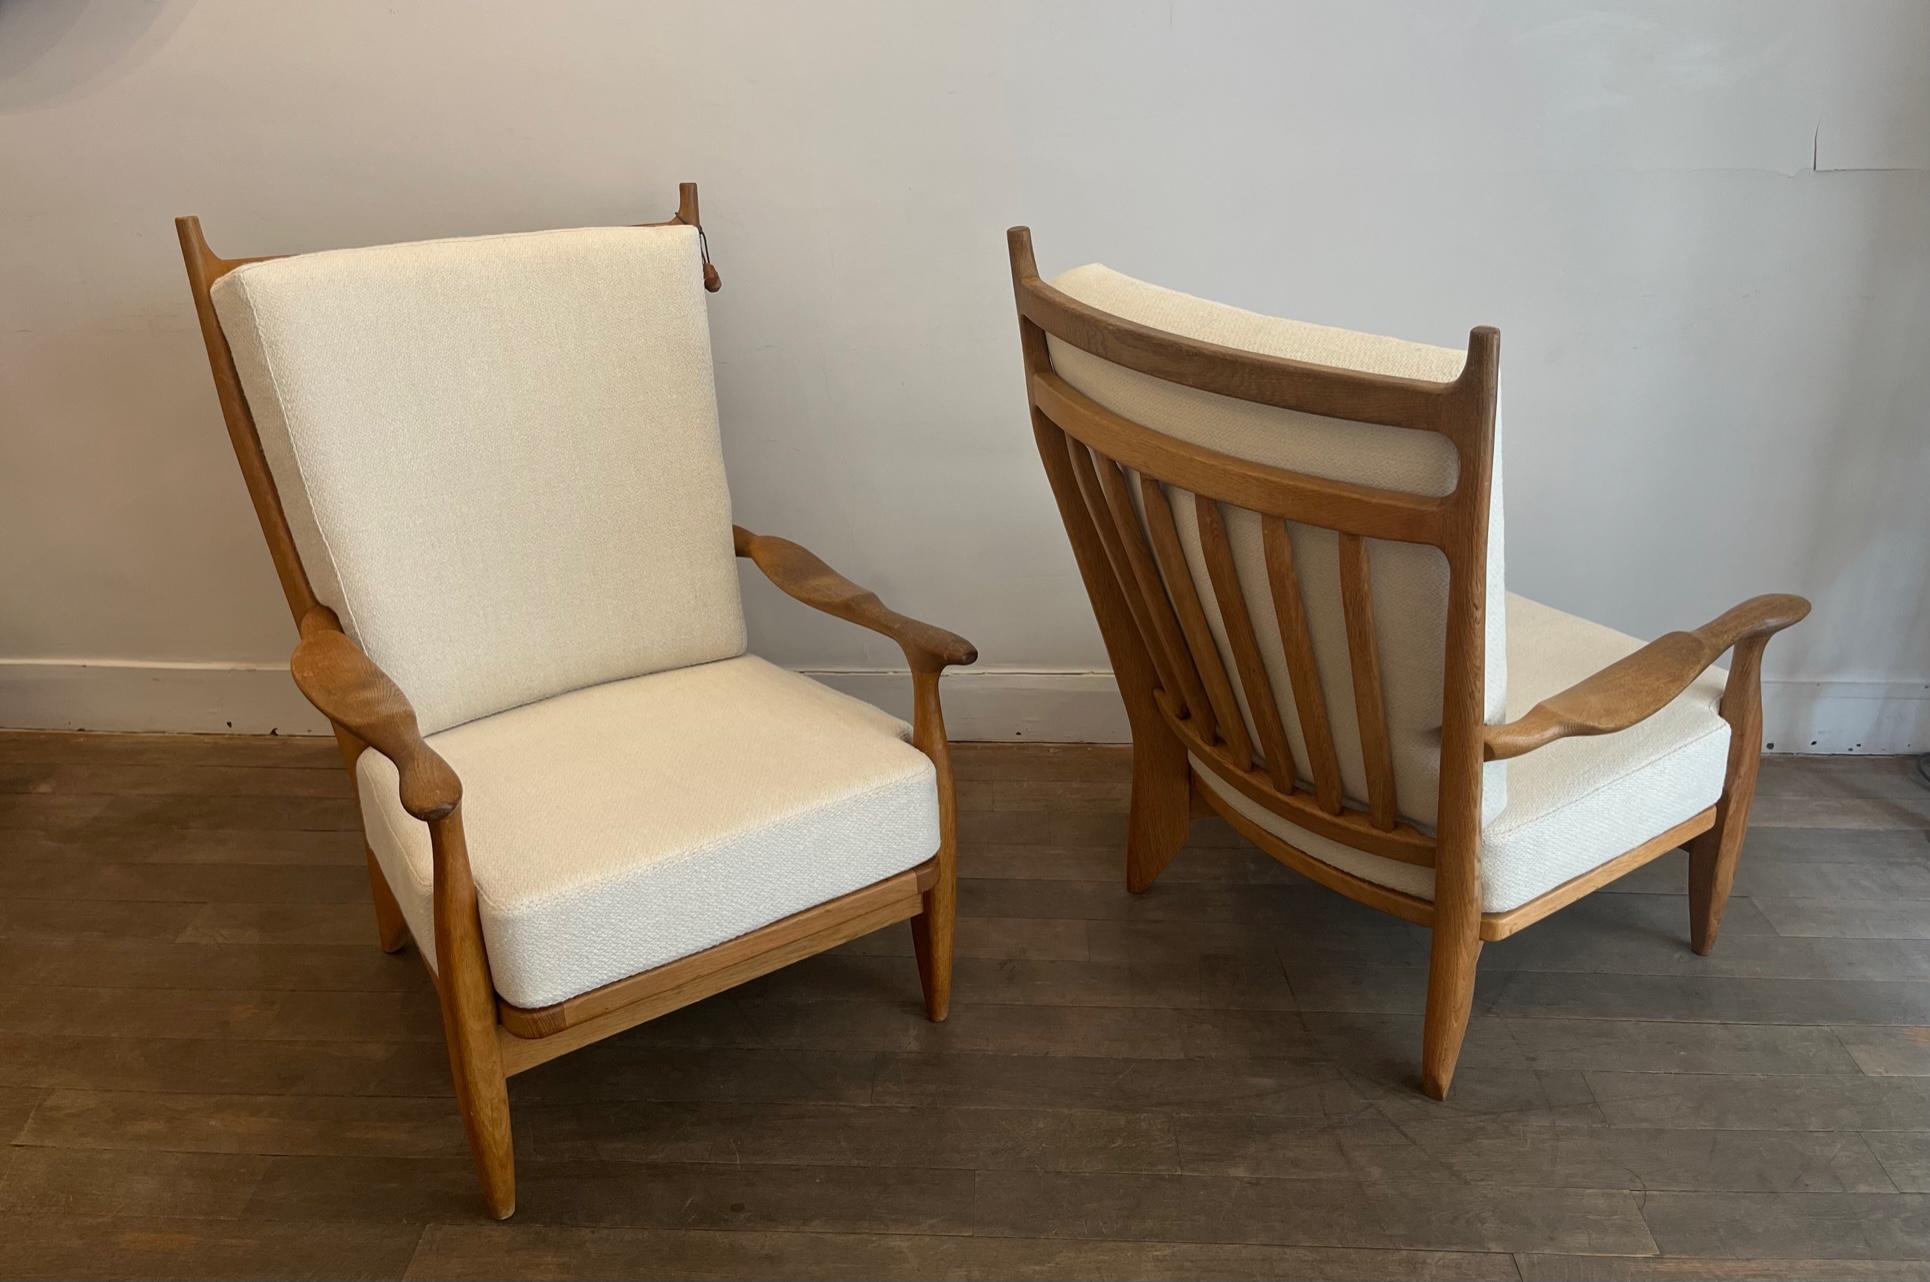 Pair of large oak lounge chairs 
Model: 